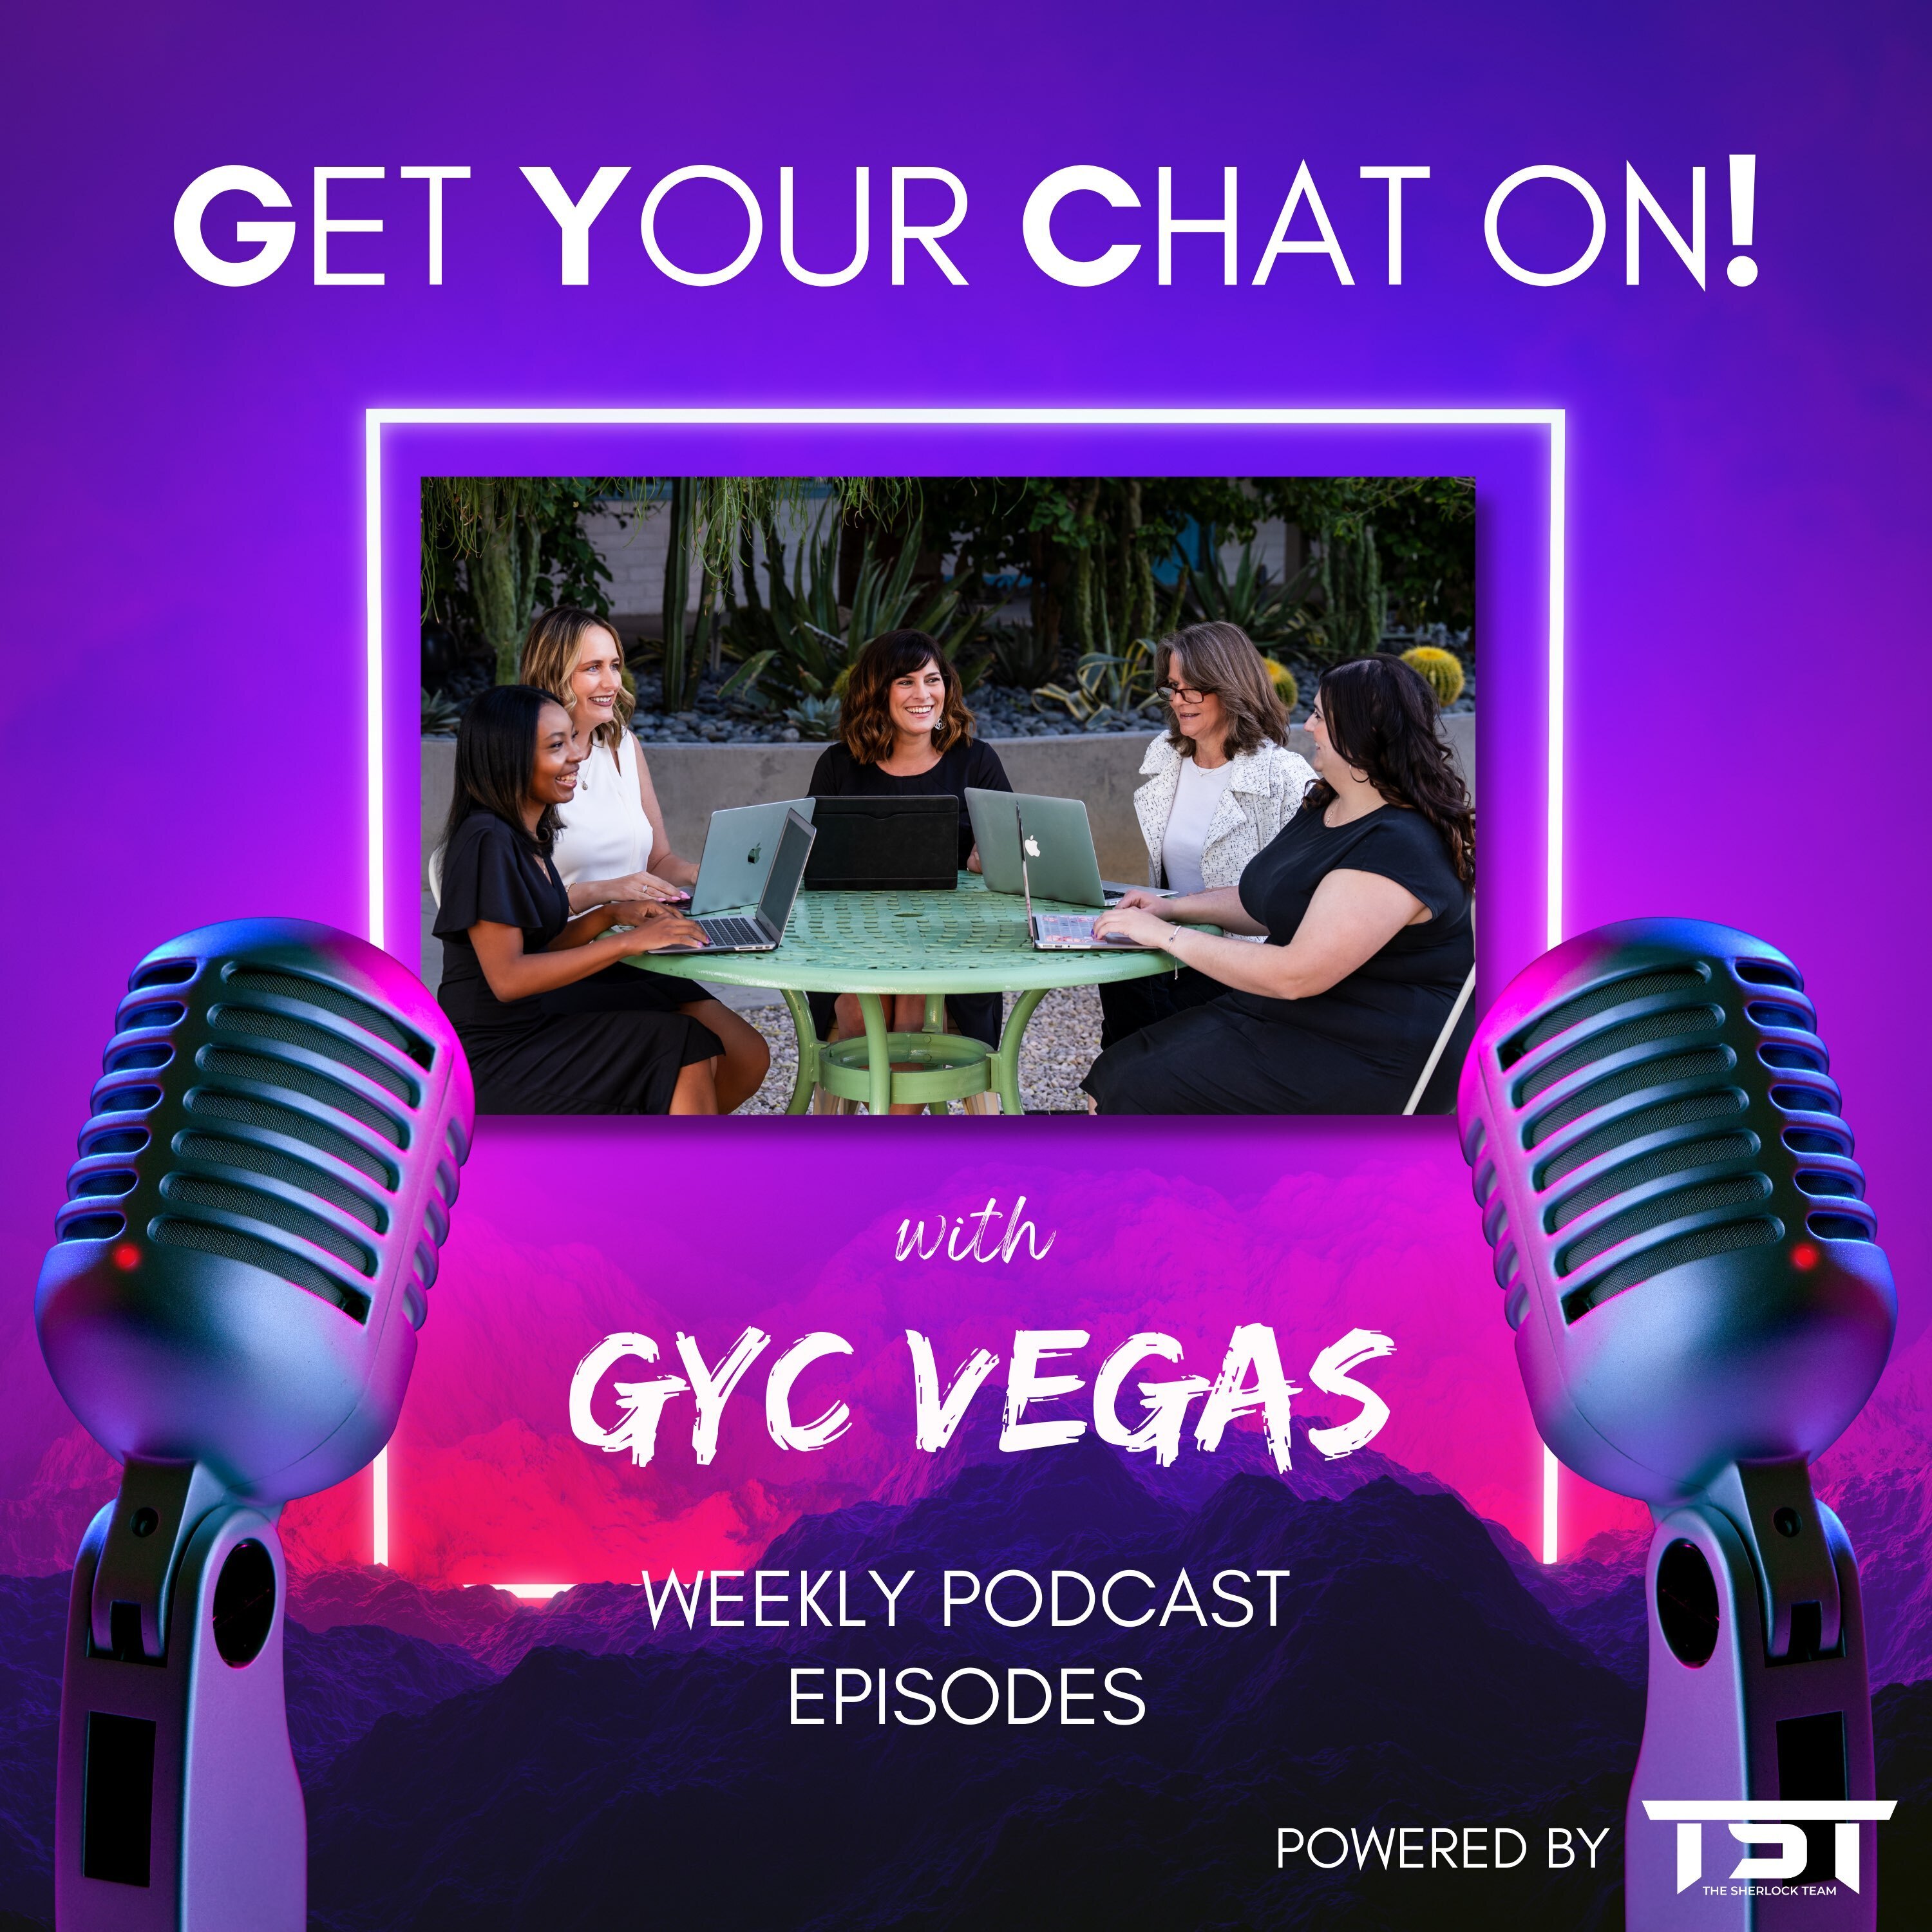 Get Your Chat on with GYC Vegas